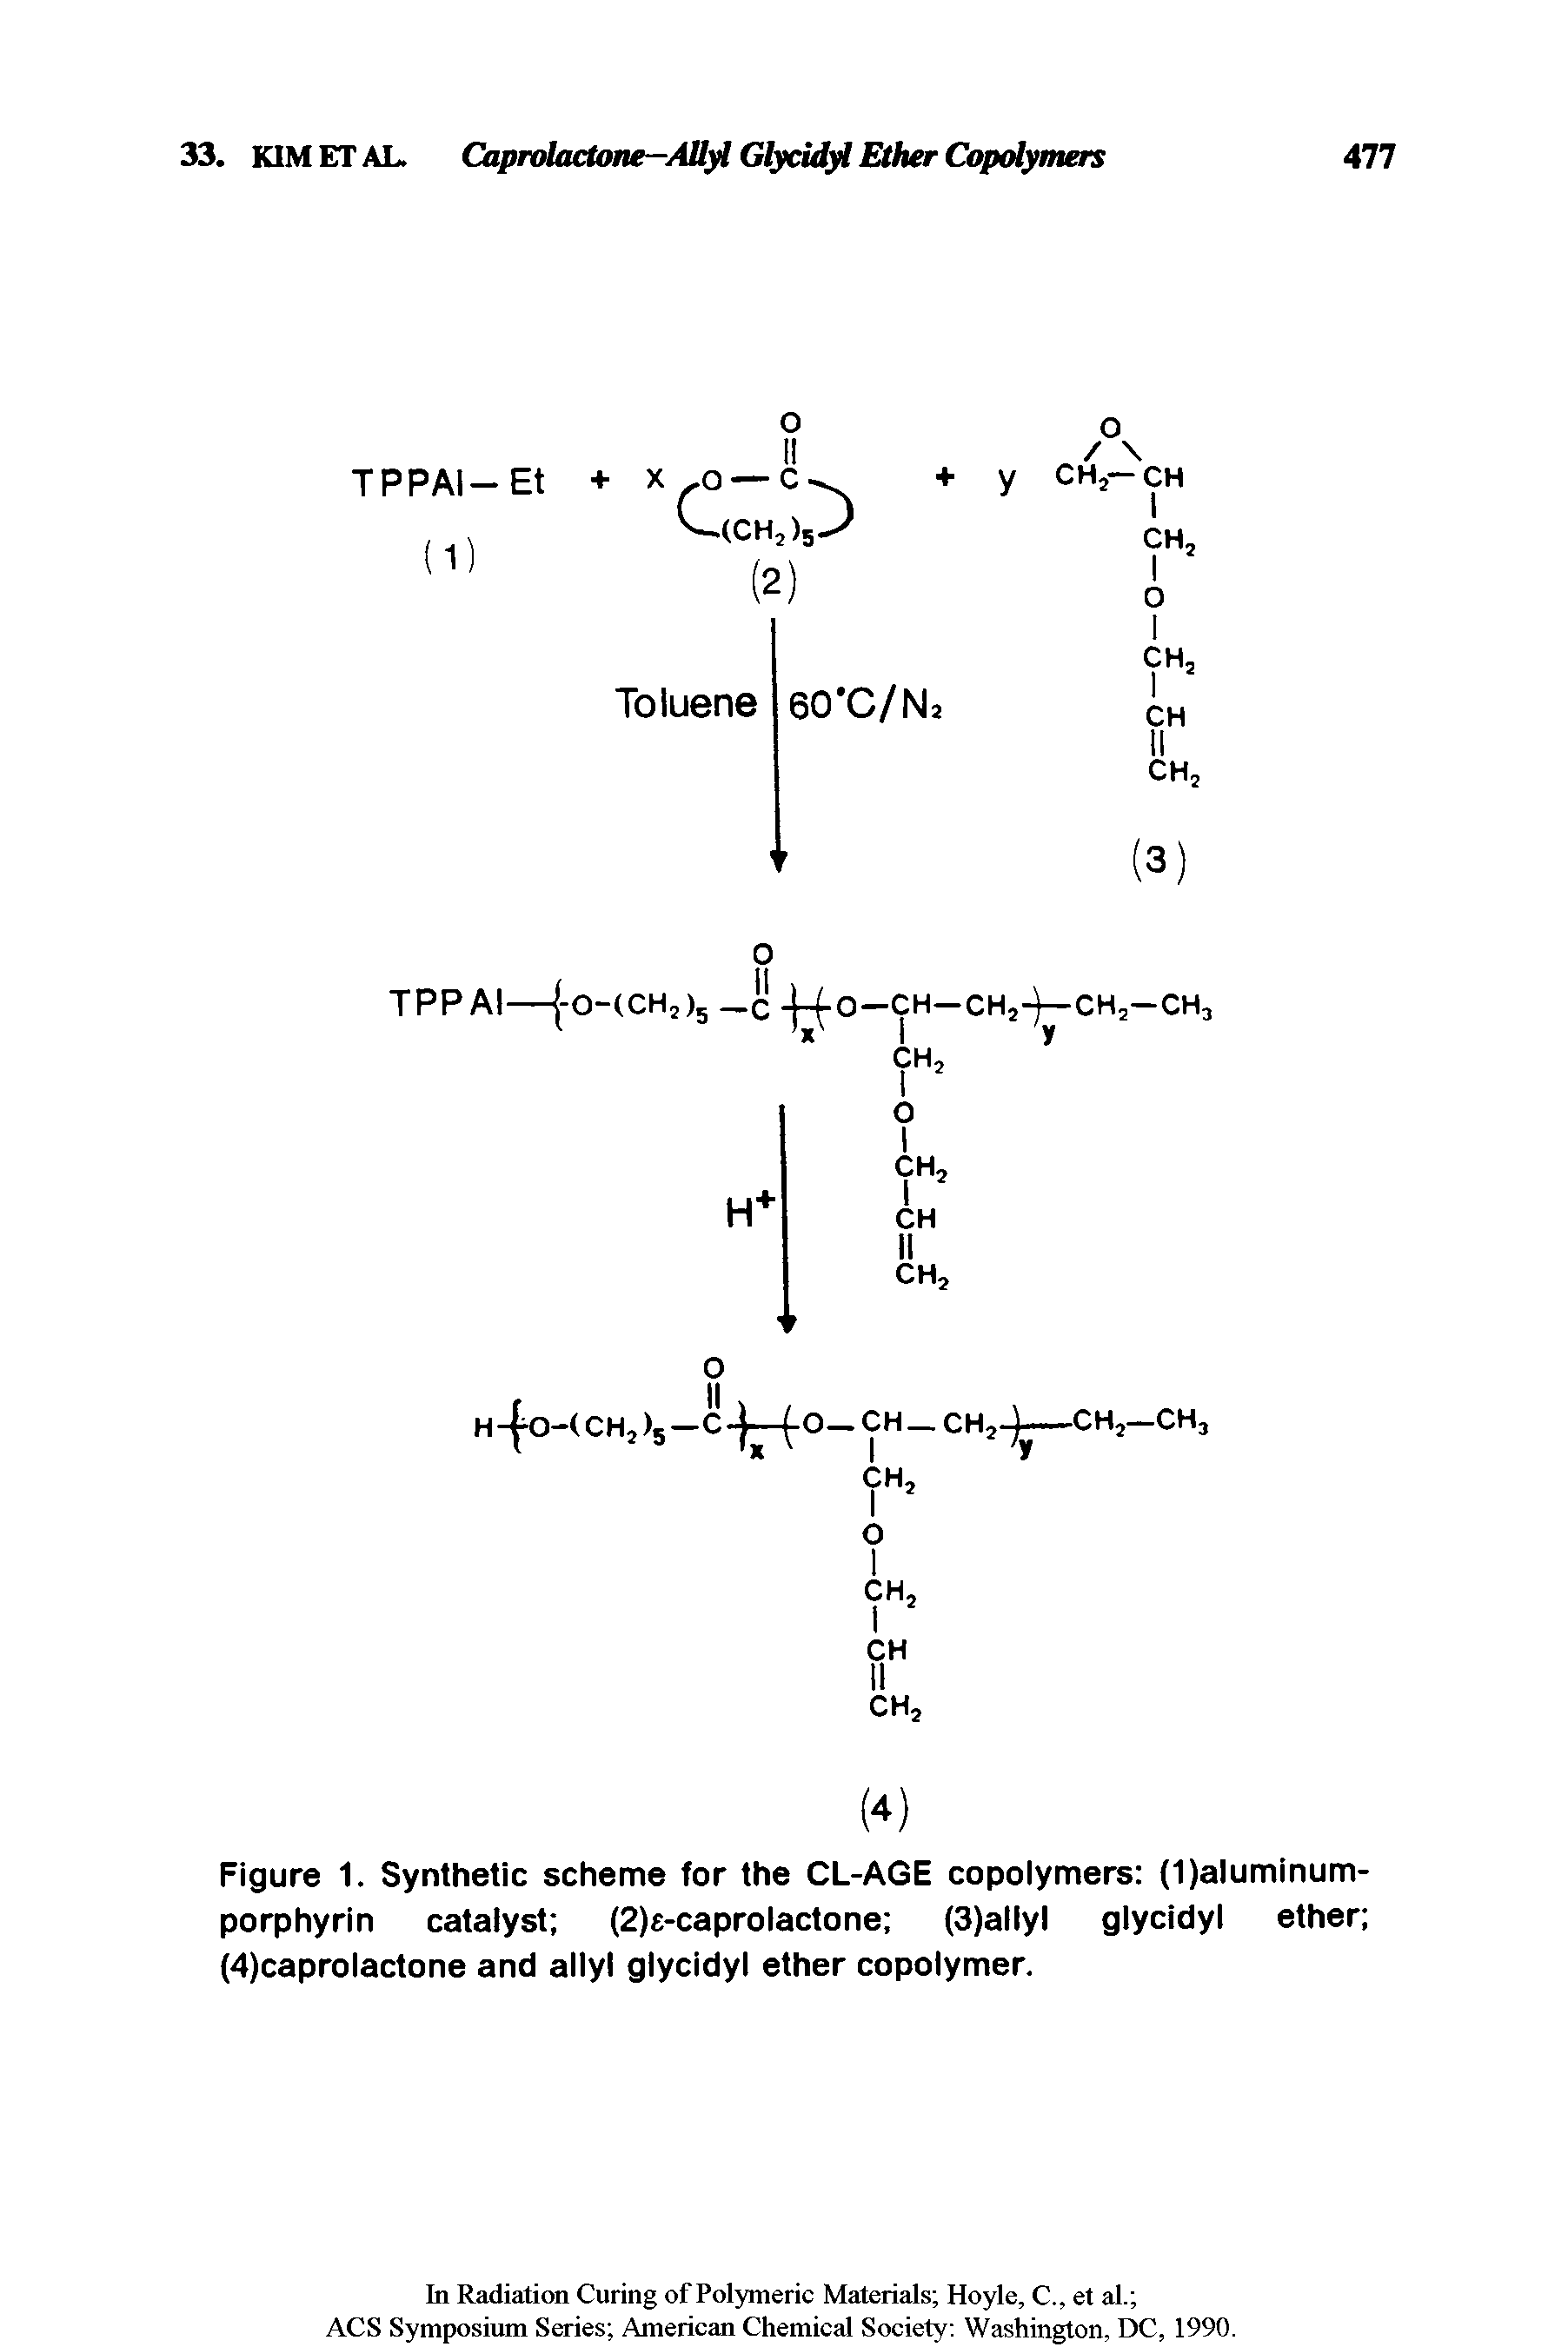 Figure 1. Synthetic scheme for the CL-AGE copolymers (1)aluminum-porphyrin catalyst (2)e-caprolactone (3)allyl glycidyl ether (4)caprolactone and allyl glycidyl ether copolymer.